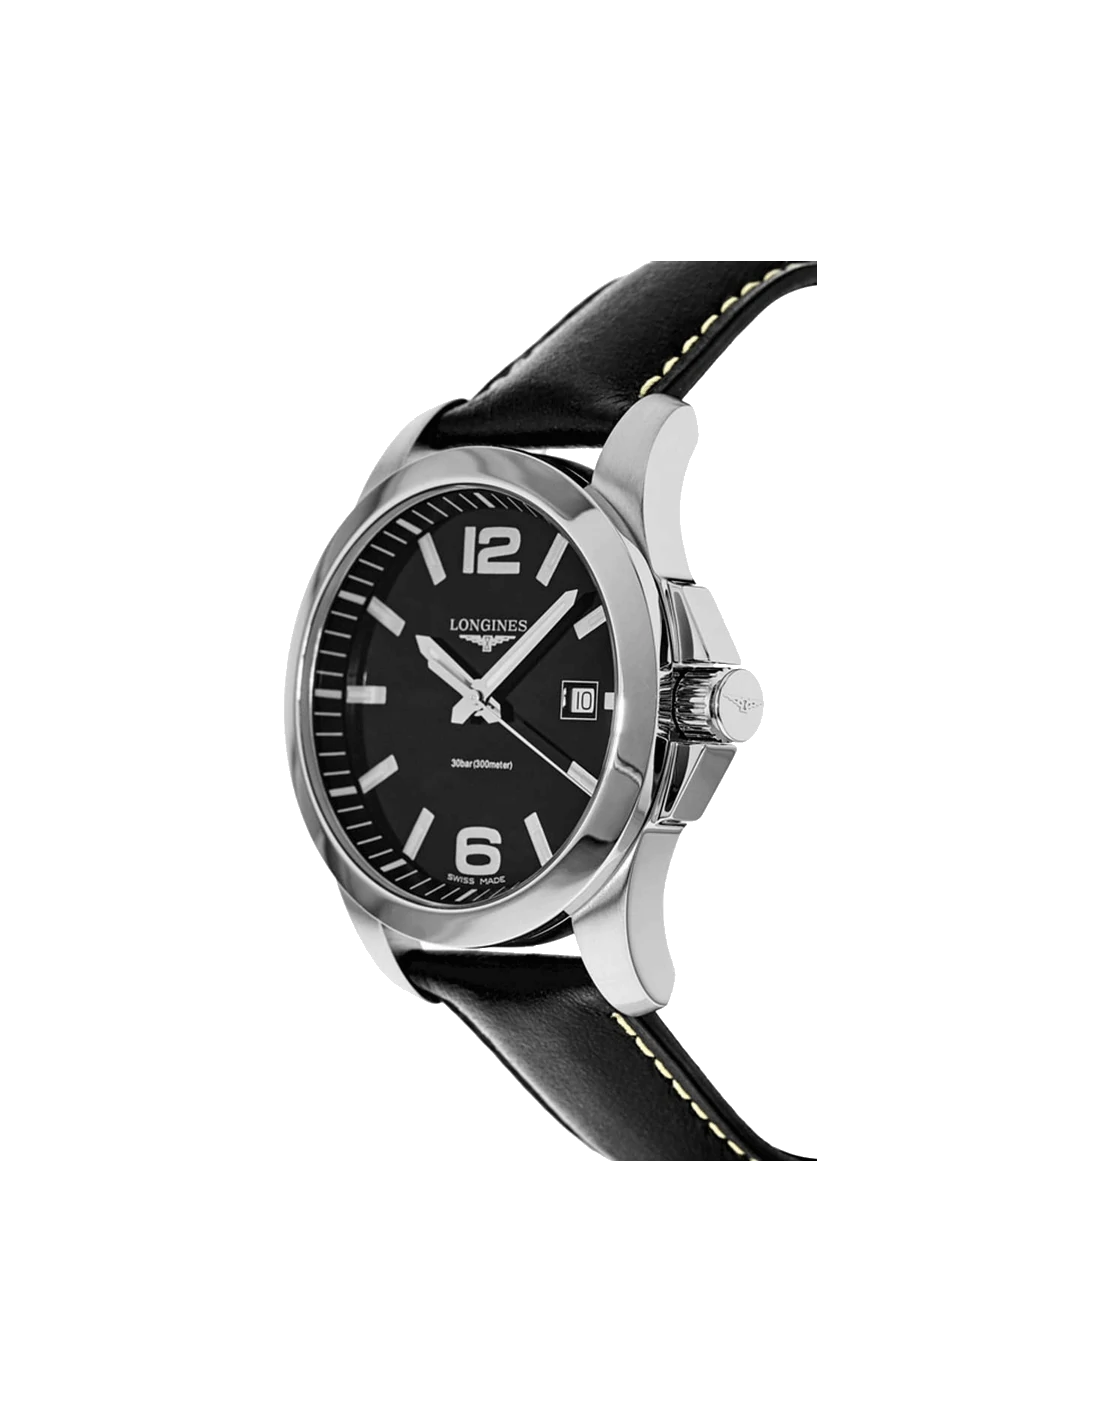 Conquest 41 Mm Black Dial Leather Strap